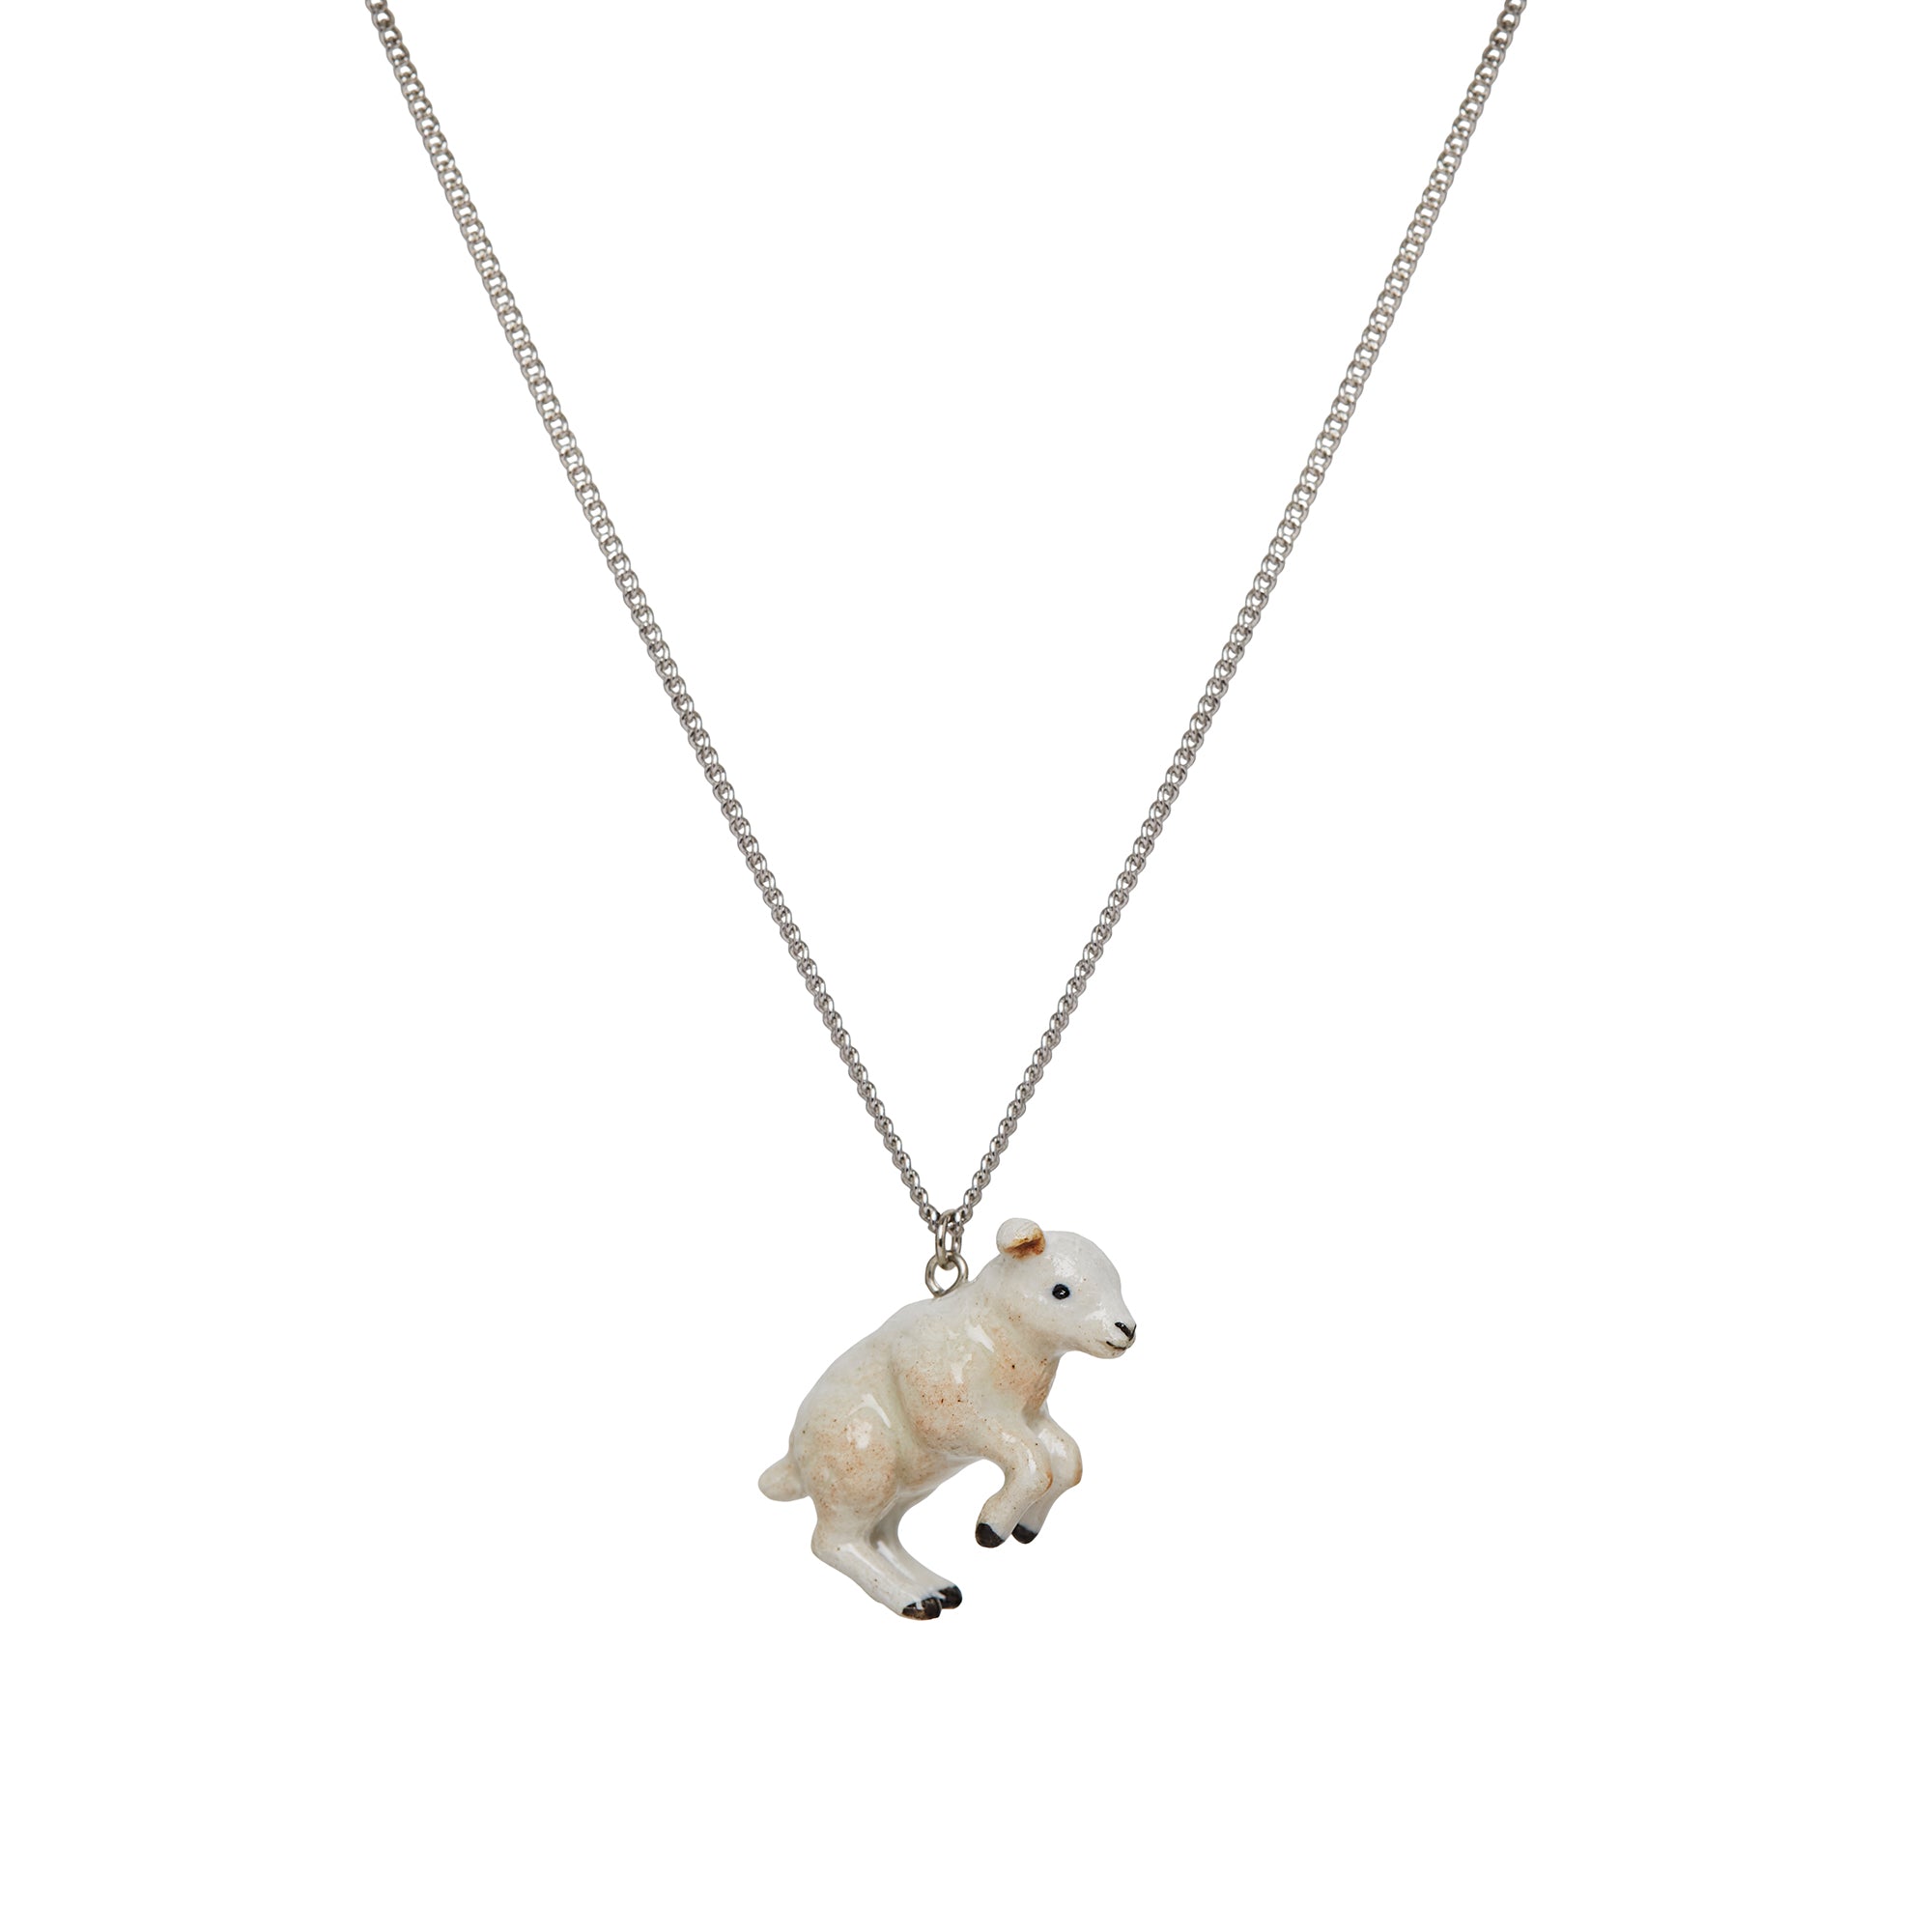 Springing Baby Lamb Necklace